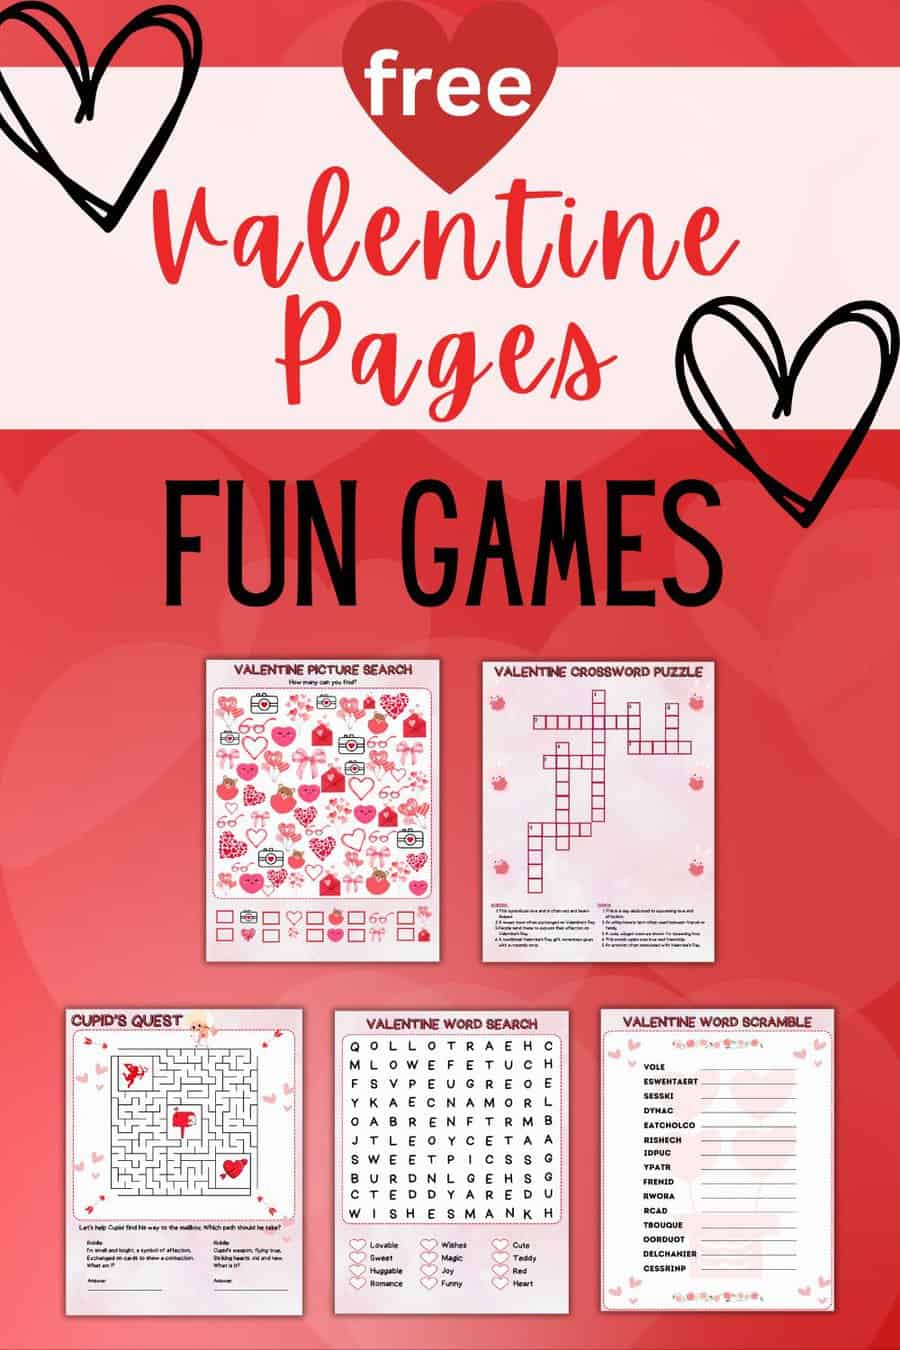 Spread the Love with Free Valentine's Printables